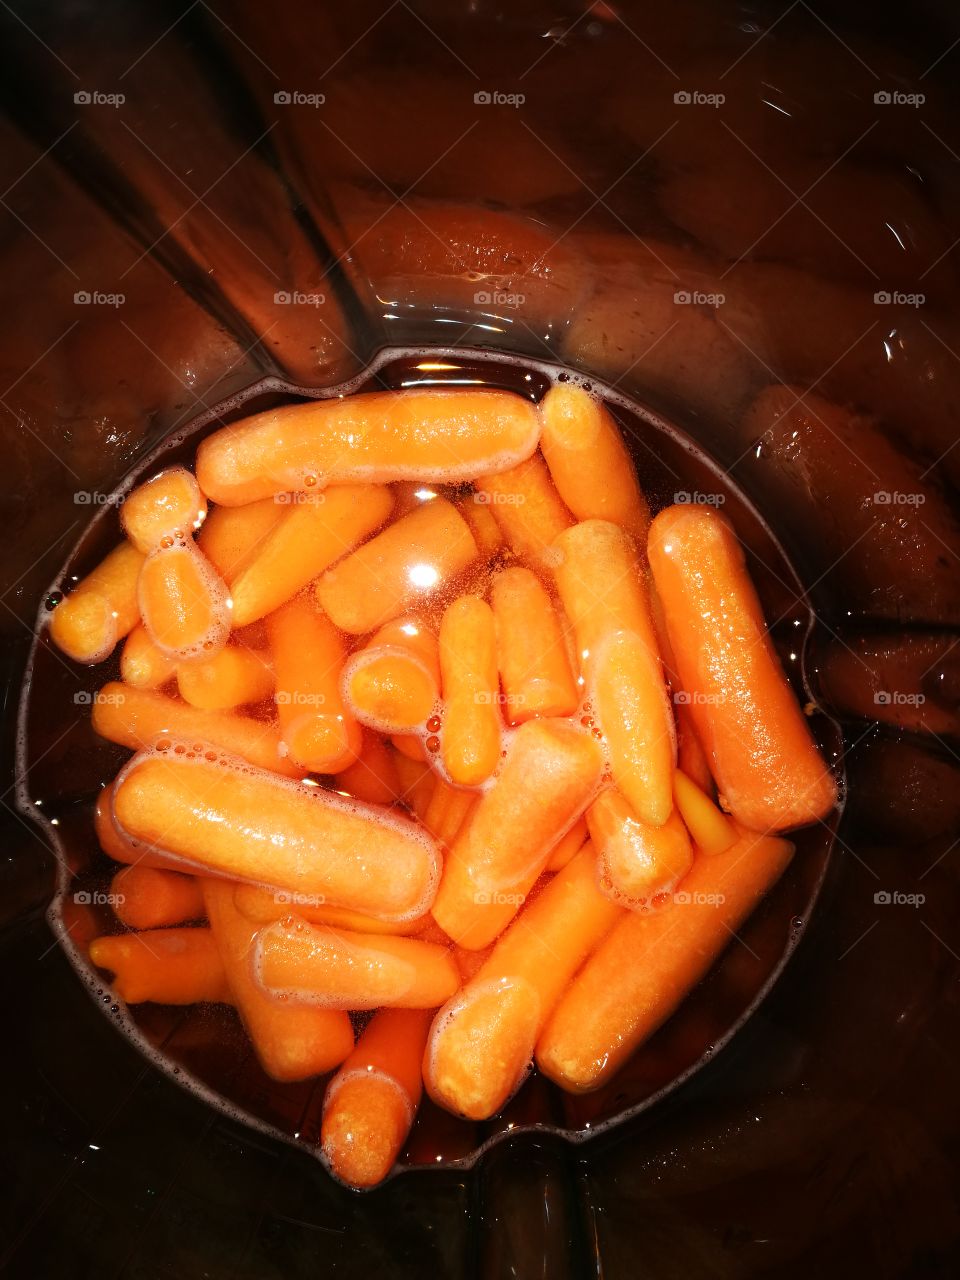 Just making some carrot juice. I loved it very much.